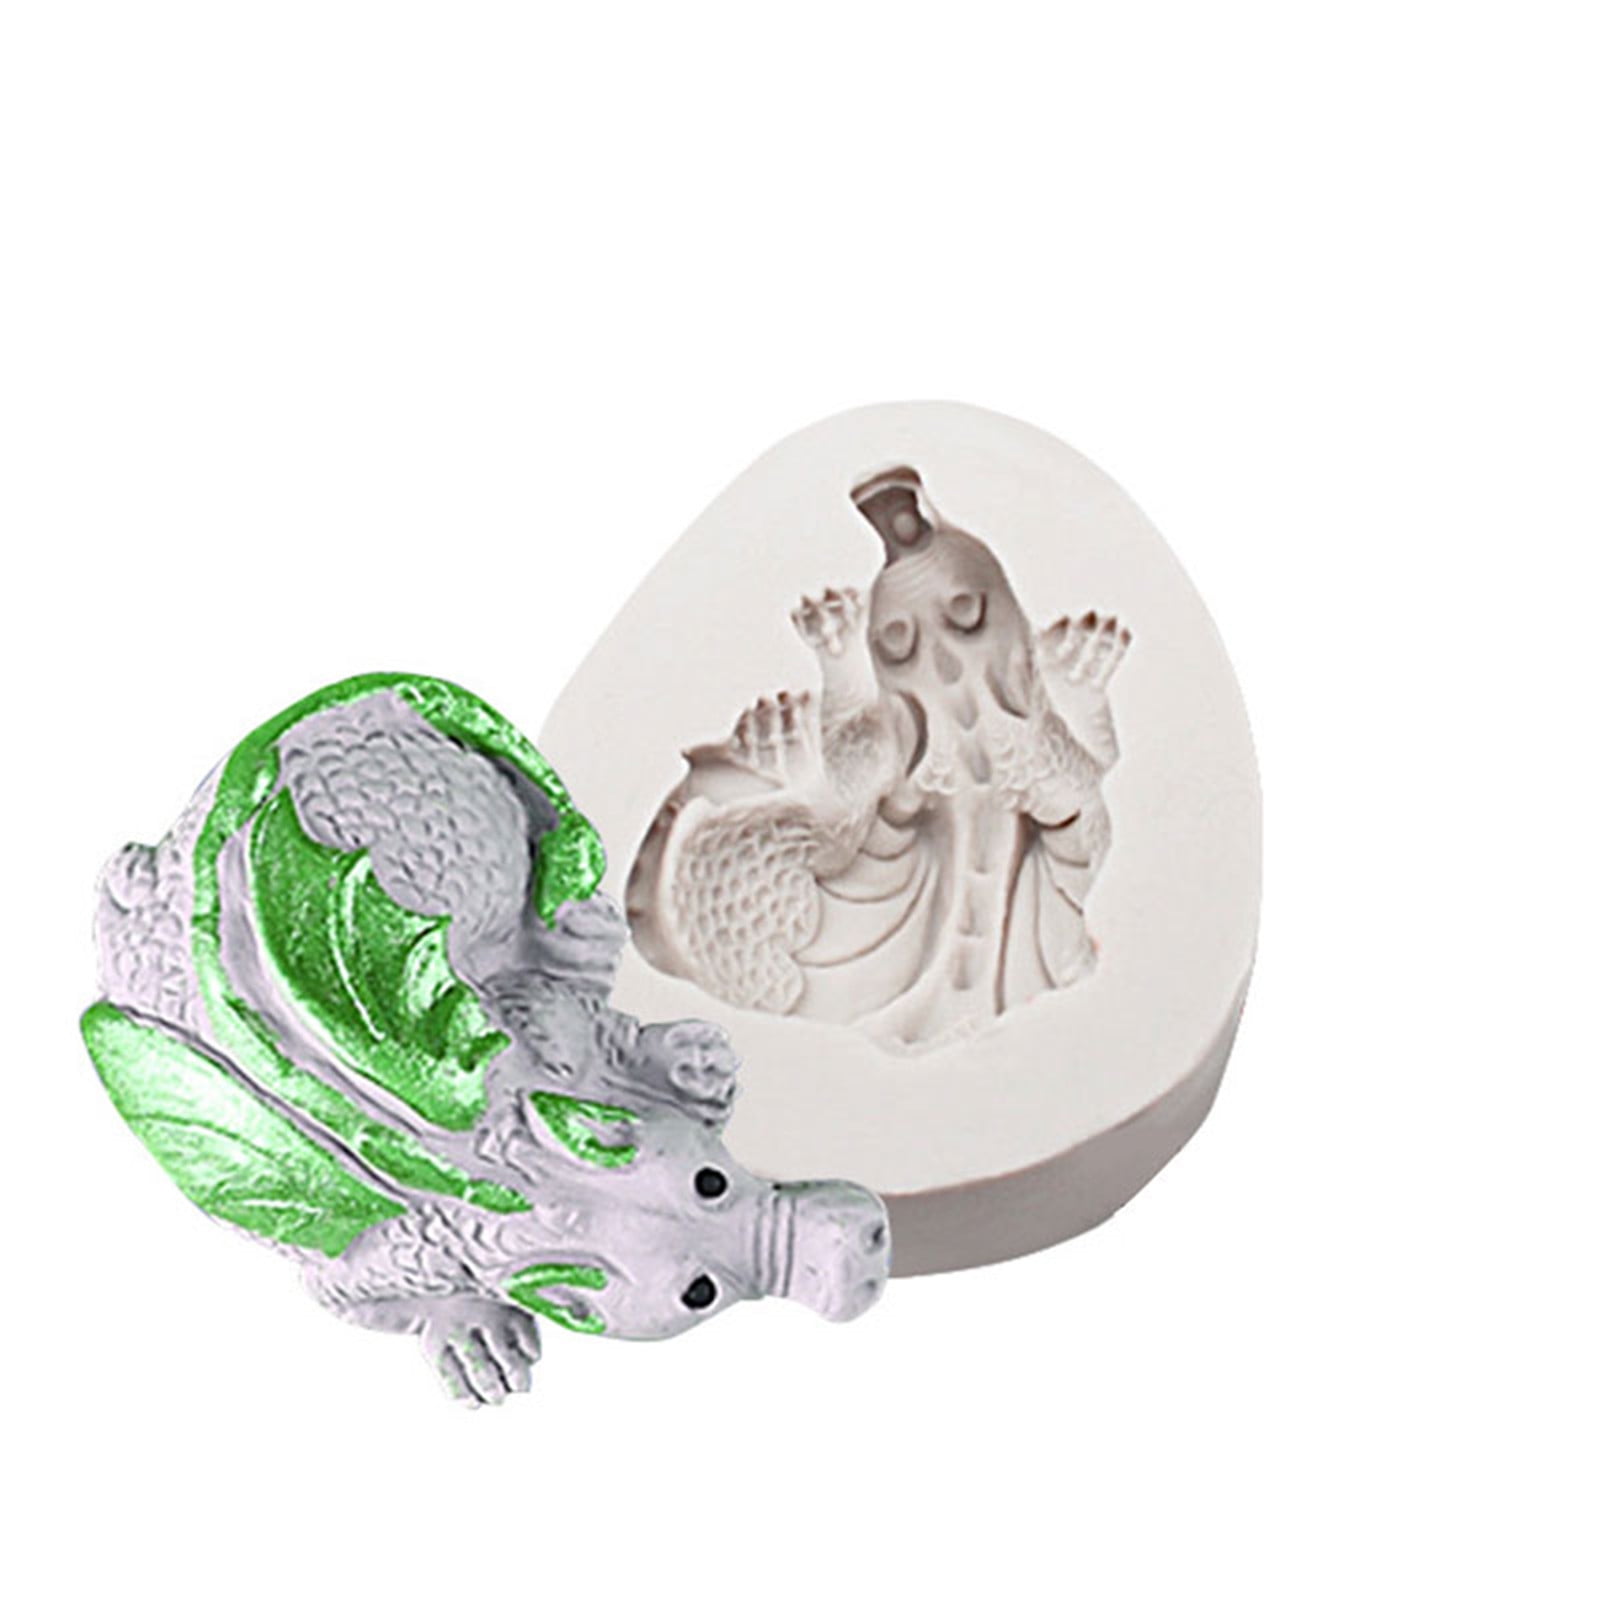 3D Dragon Fondant Silicone Mold Decorating Tool Baking Chocolate Soap Cake Mould